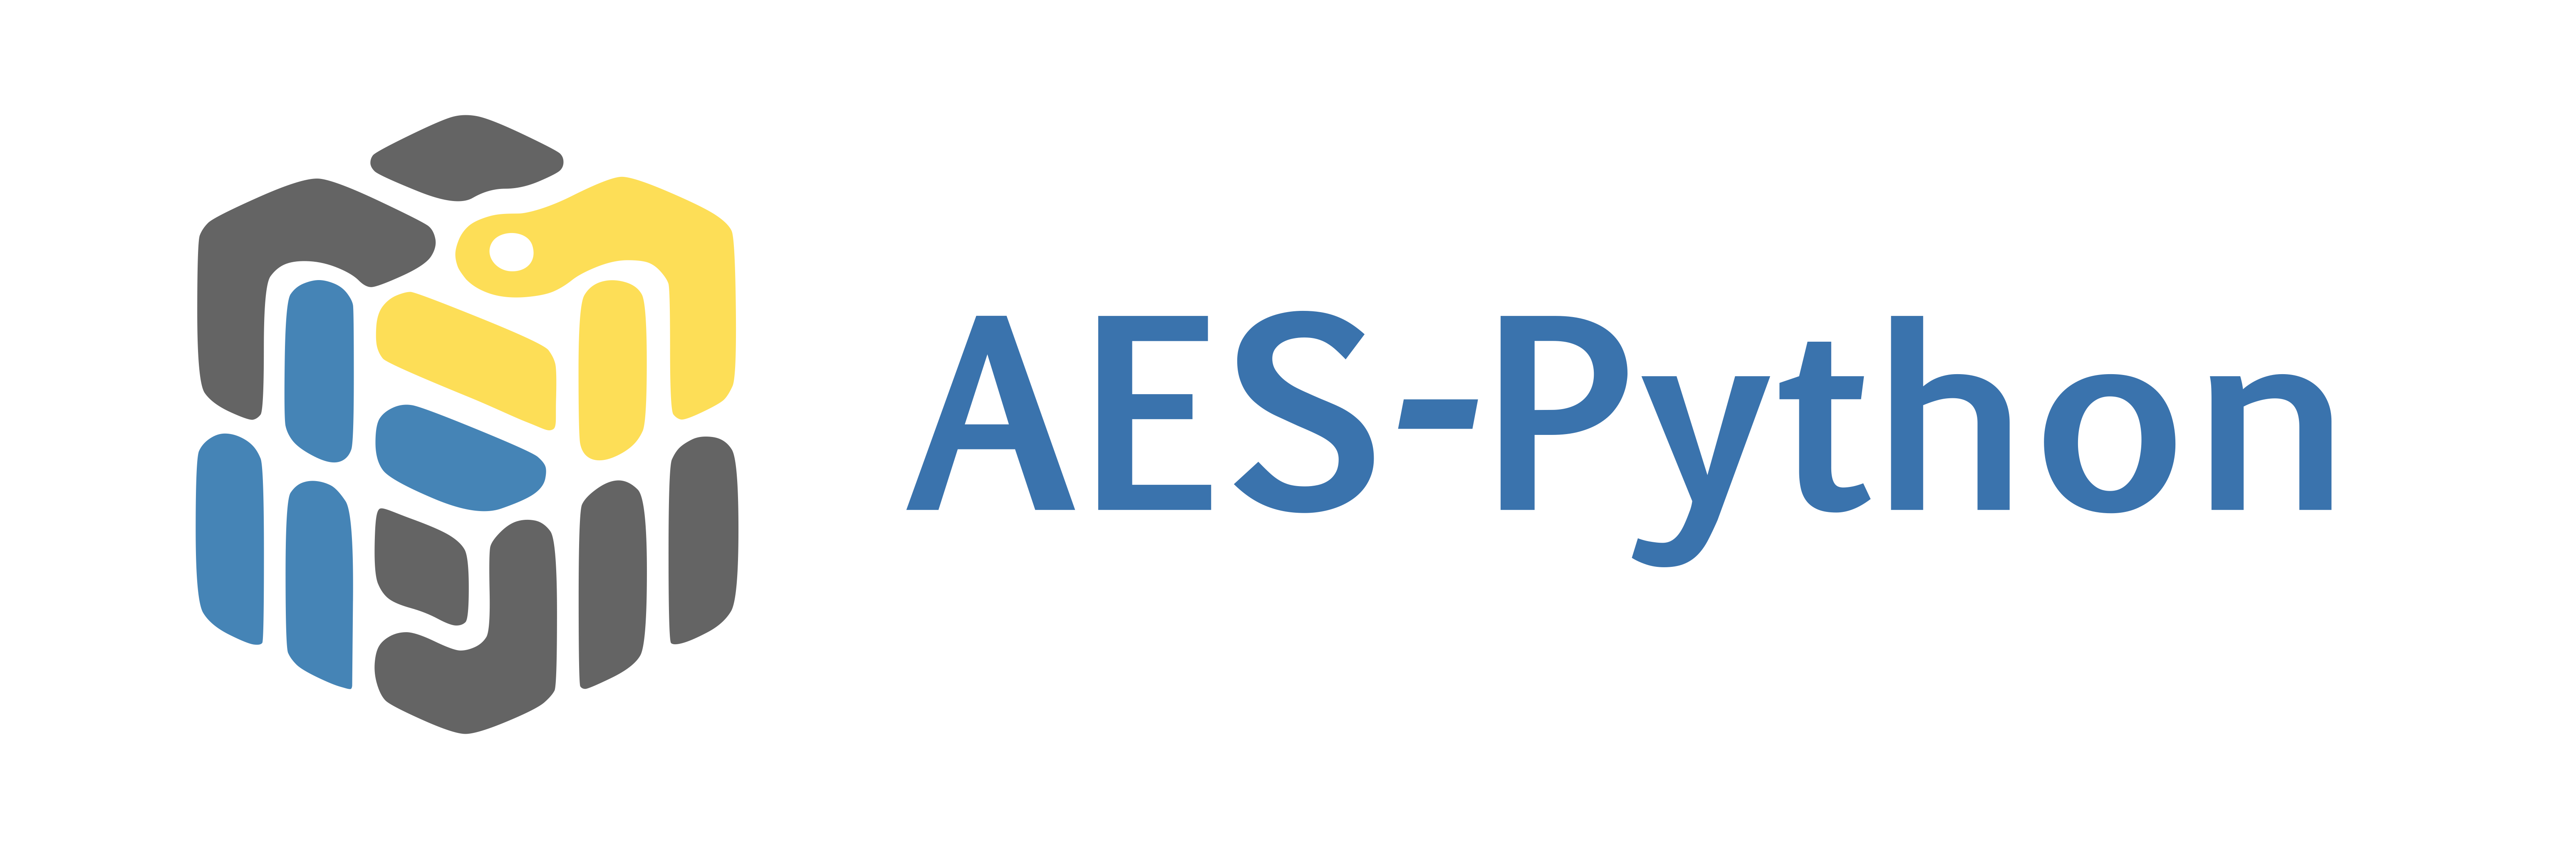 AES-Python: A Python implementation of the Advanced Encryption Standard (AES)